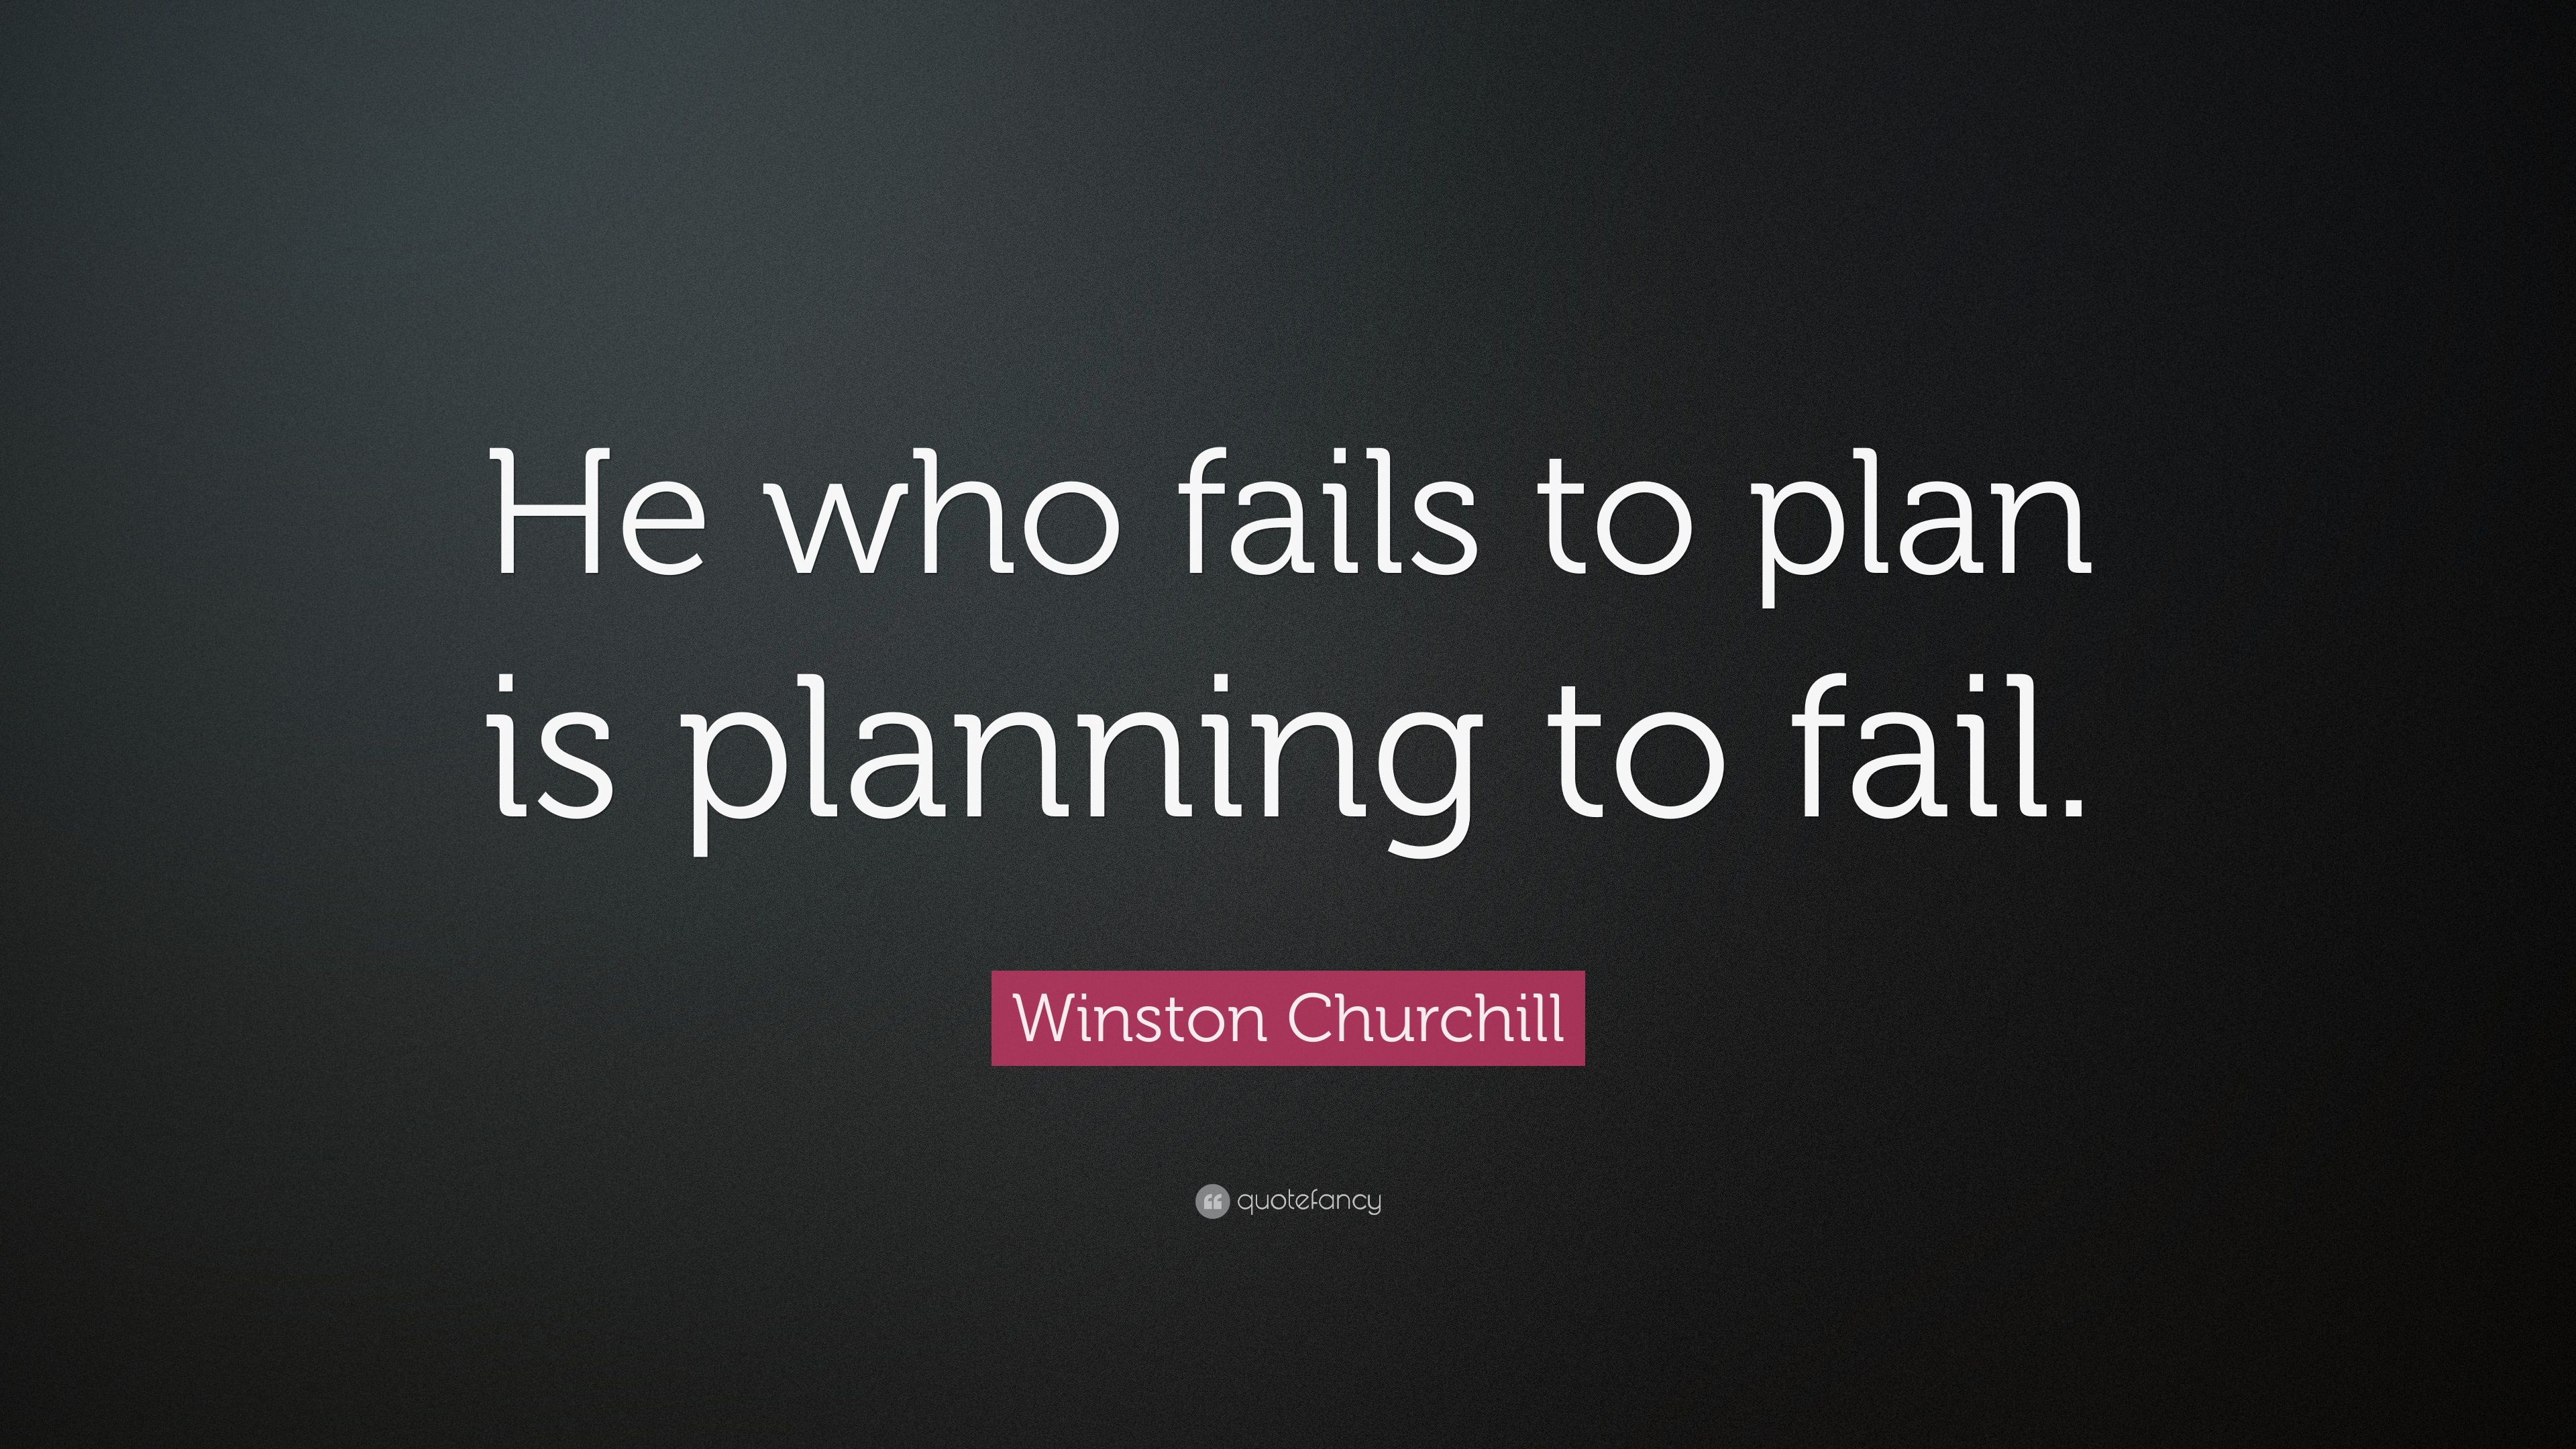 Winston Churchill Quote: “He who fails to plan is planning to fail